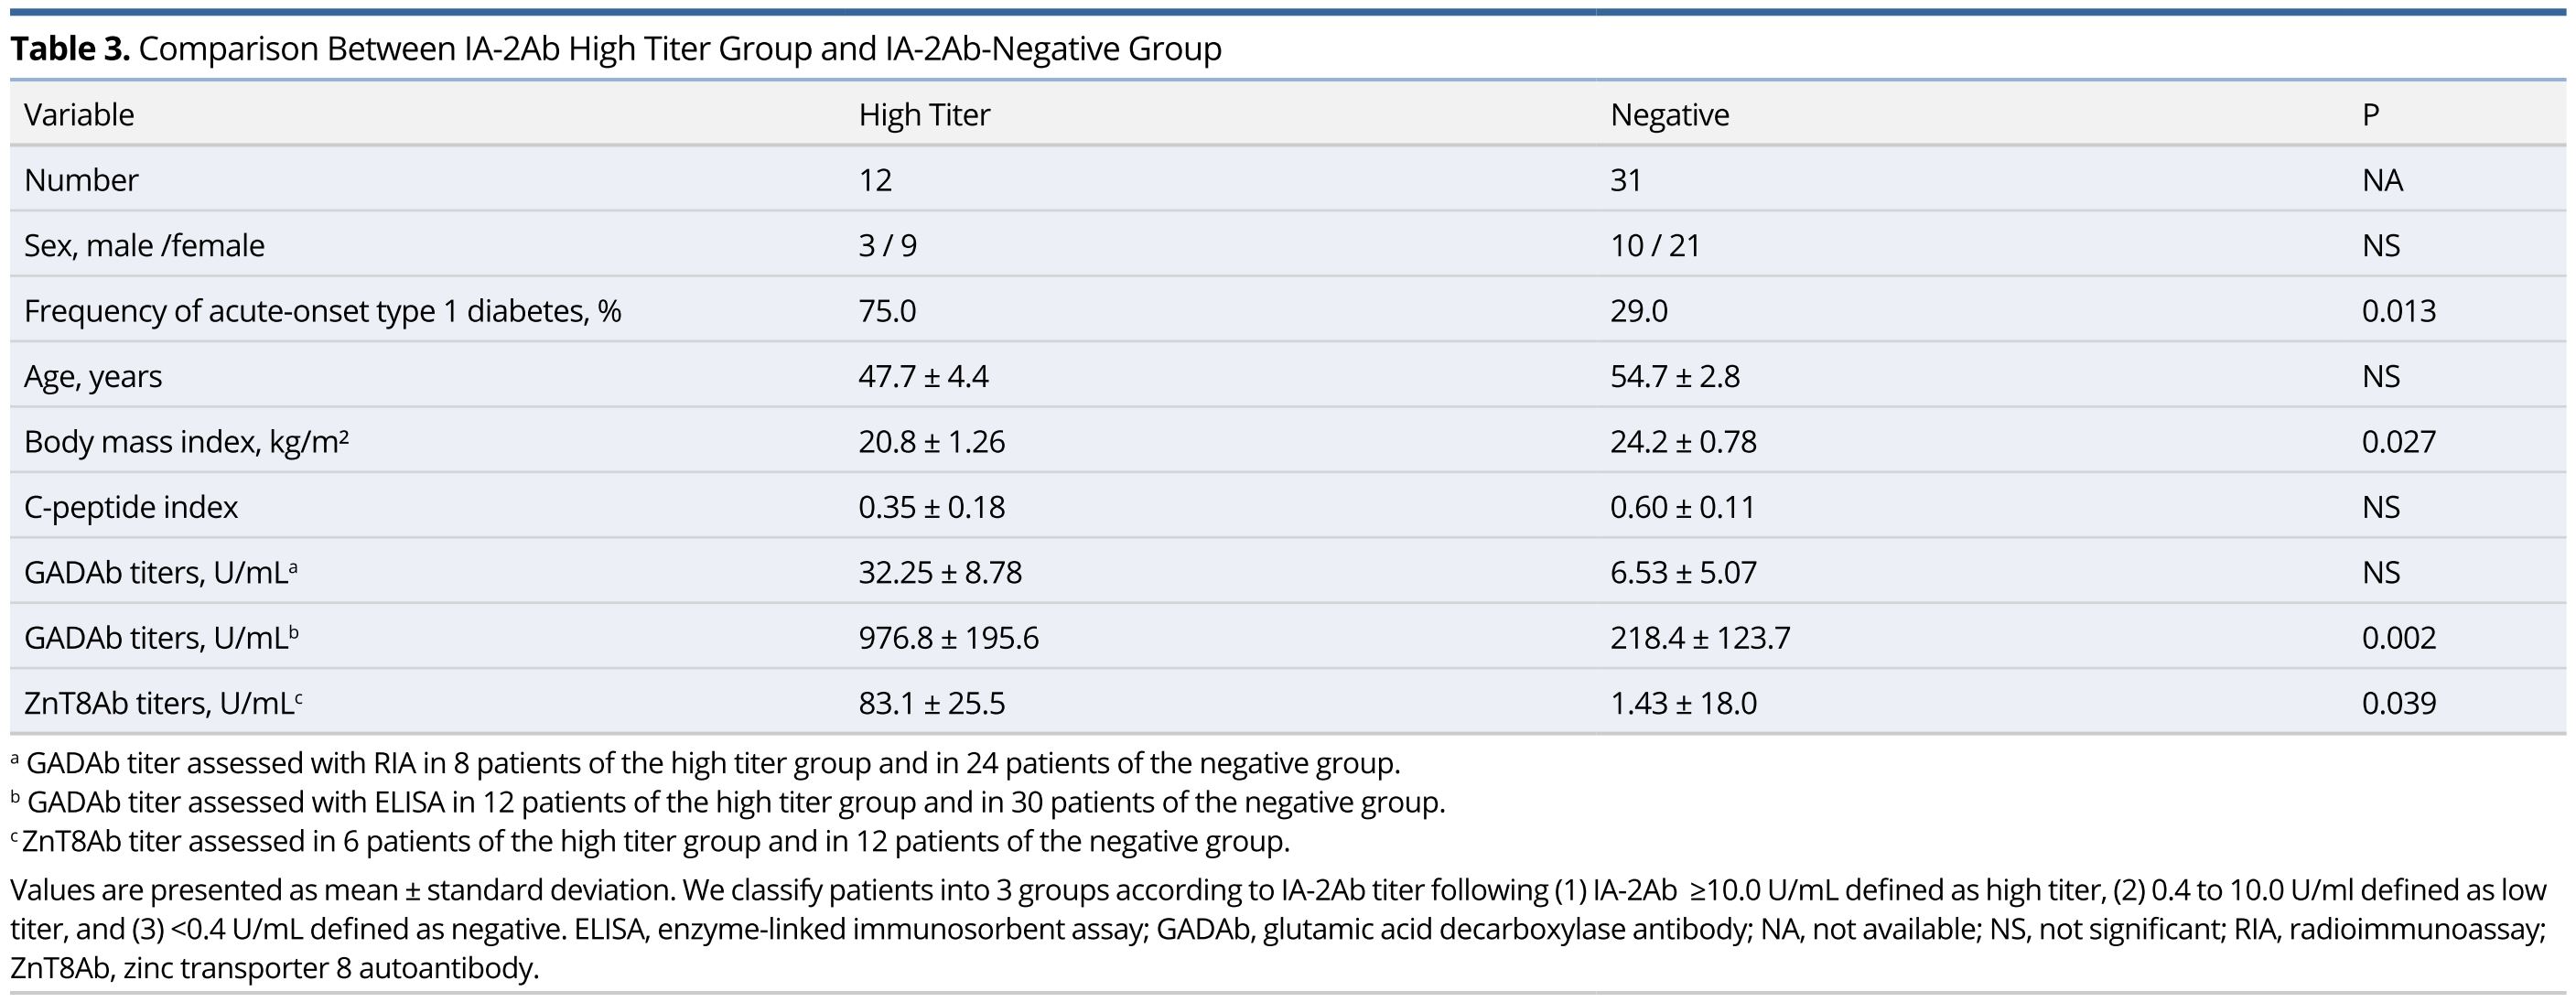 Table 3.JPGComparison Between IA-2Ab High Titer Group and IA-2Ab-Negative Group